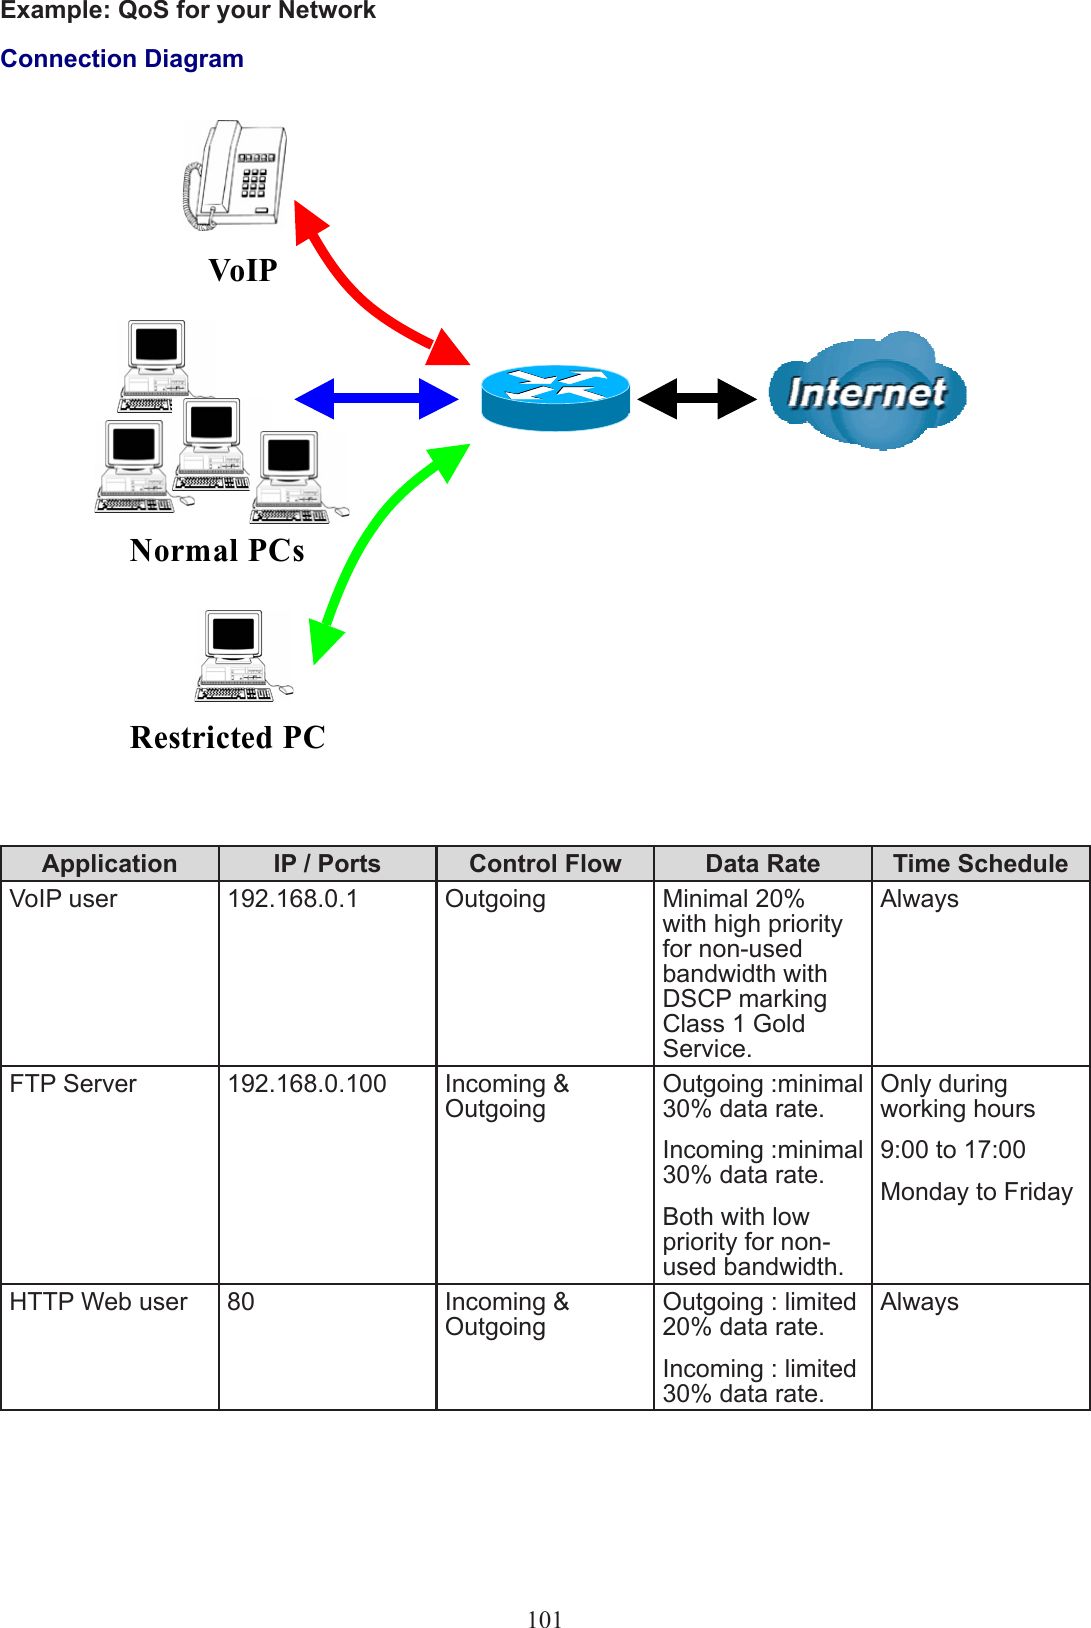 Example: QoS for your NetworkConnection DiagramApplication IP / Ports Control Flow Data Rate Time ScheduleVoIP user 192.168.0.1 Outgoing Minimal 20% with high priority for non-used bandwidth with DSCP marking Class 1 Gold Service.AlwaysFTP Server 192.168.0.100 Incoming &amp; OutgoingOutgoing :minimal 30% data rate.Incoming :minimal 30% data rate.Both with low priority for non-used bandwidth.Only during working hours 9:00 to 17:00 Monday to FridayHTTP Web user 80 Incoming &amp; OutgoingOutgoing : limited 20% data rate.Incoming : limited 30% data rate.Always101 Restricted PC Normal PCs VoIP 